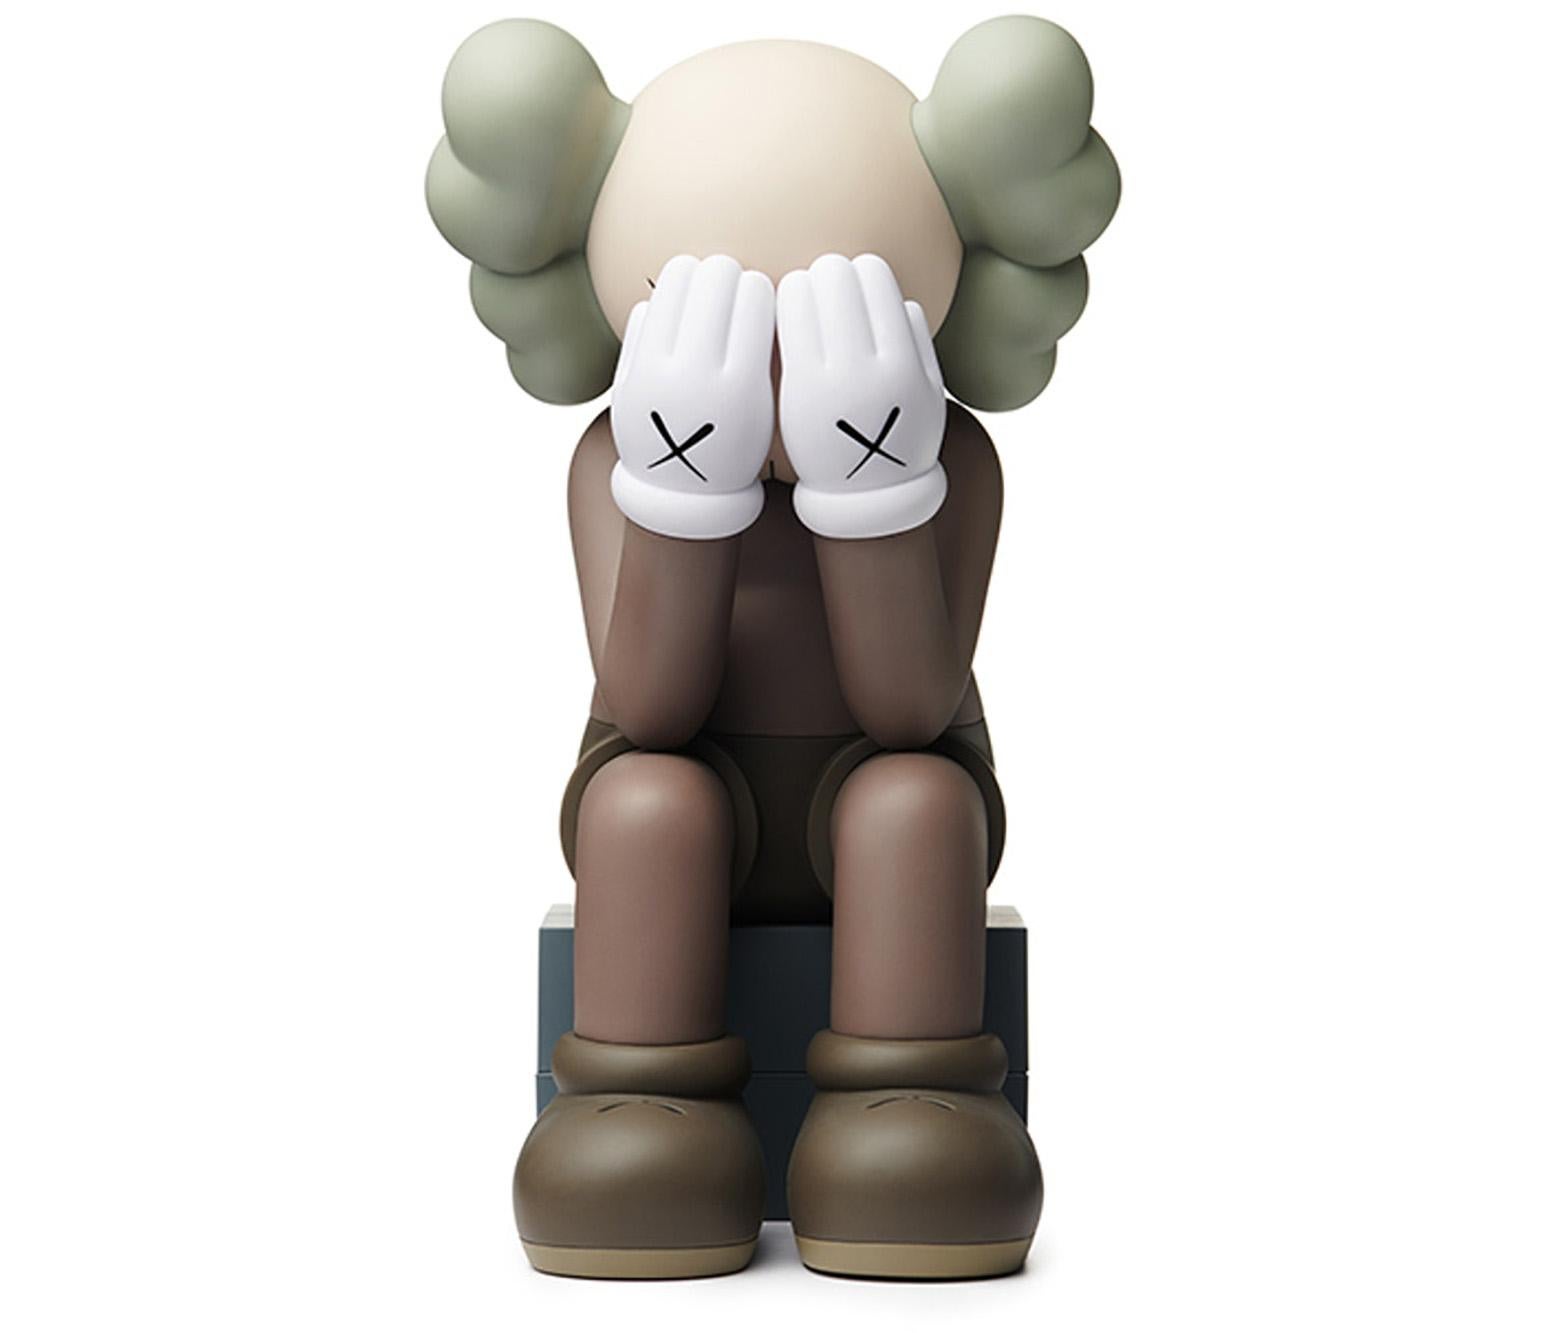 KAWS Passing Through Companion 2018. New and sealed in its original packaging. 
The most iconic of KAWS Companions, this Passing Through figure was published by KAWS One, and has since sold out.

Medium: Vinyl Paint, Cast Resin. 
Year: